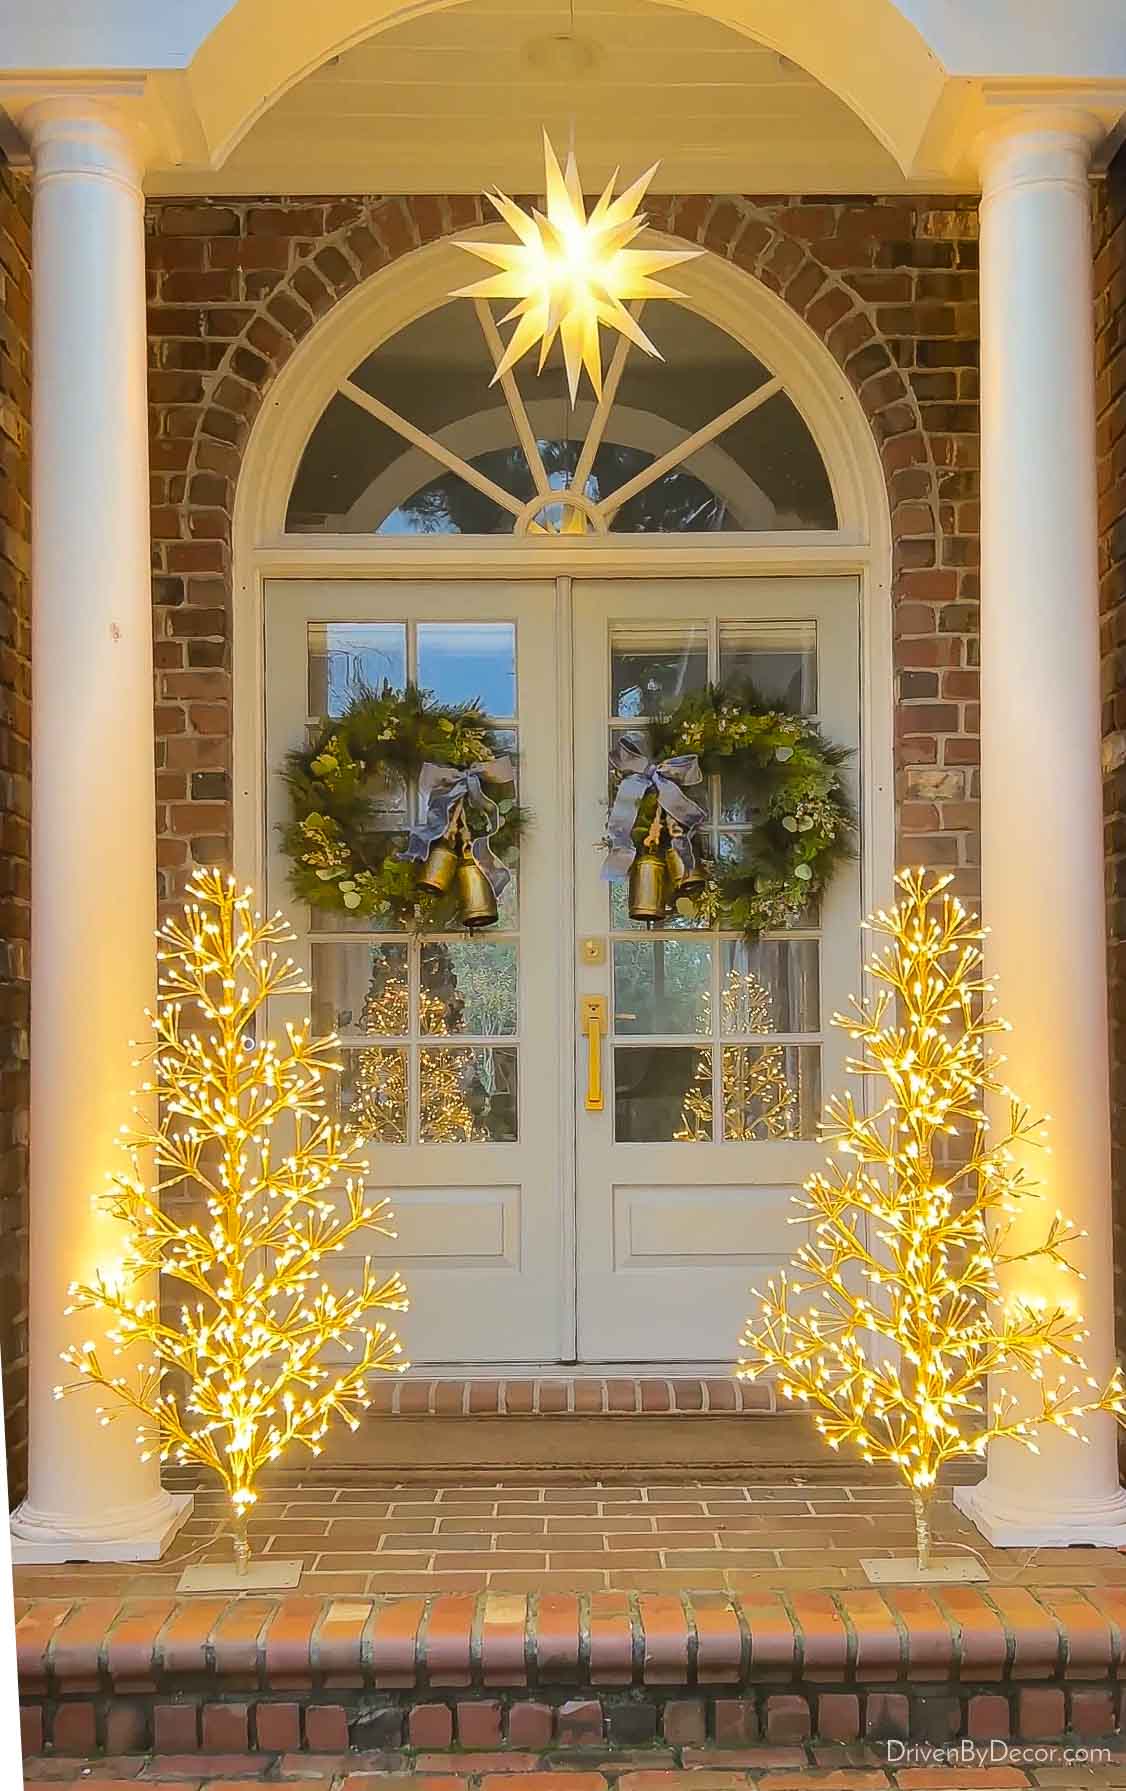 A Set of 4 Christmas Tree, Porch or Patio Decoration Color LED